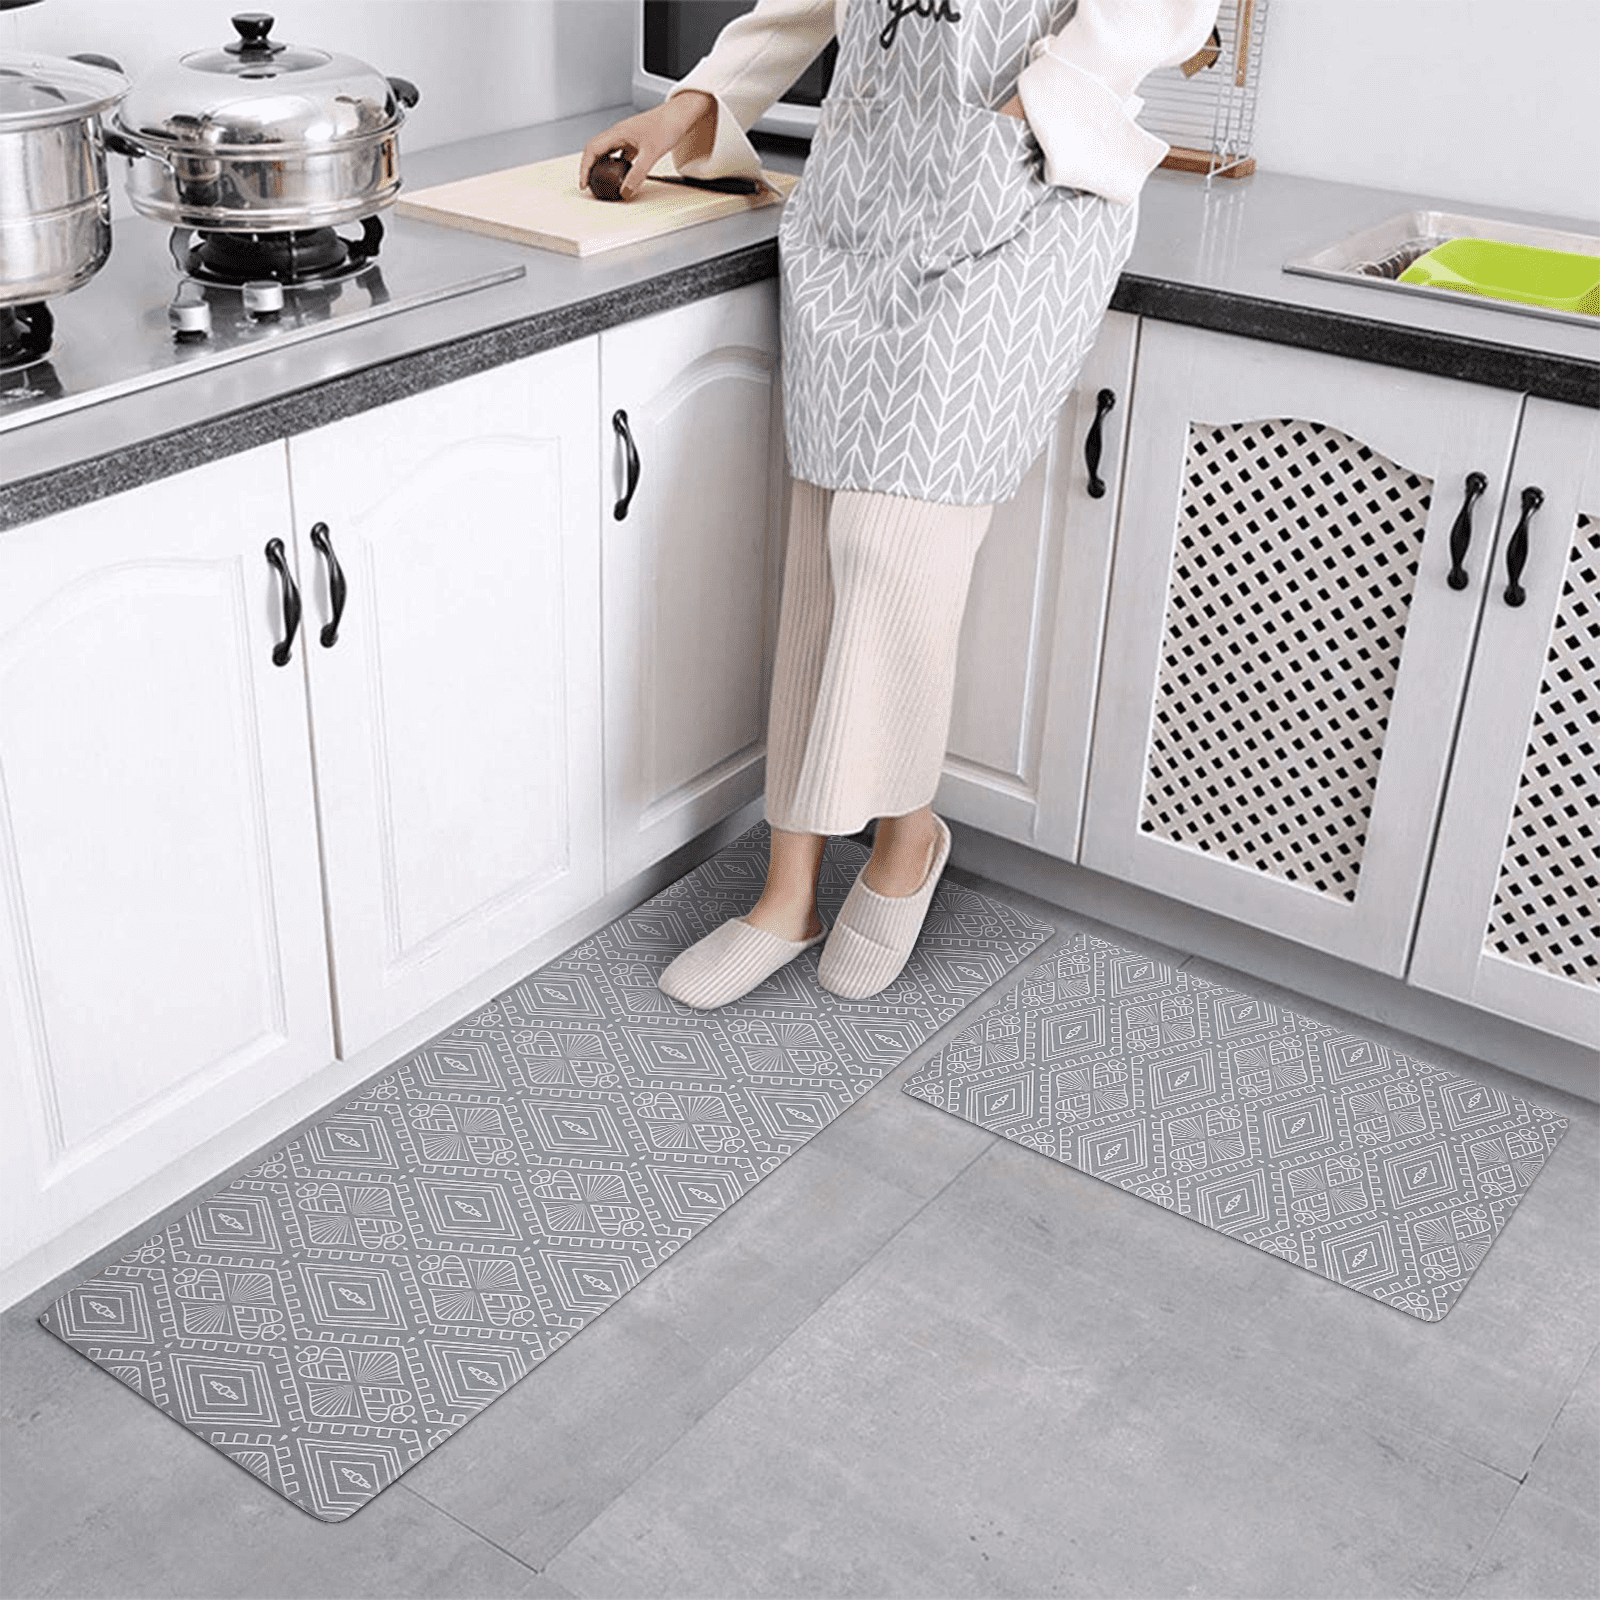  Colorful Star Small Kitchen Mat for Floor Non Slip PVC Leather Kitchen  Rug Anti Fatigue Waterproof Comfort Mat Geometric Oil Proof Laundry  Standing Mat 17 W x 29 L, Honeycomb Marble